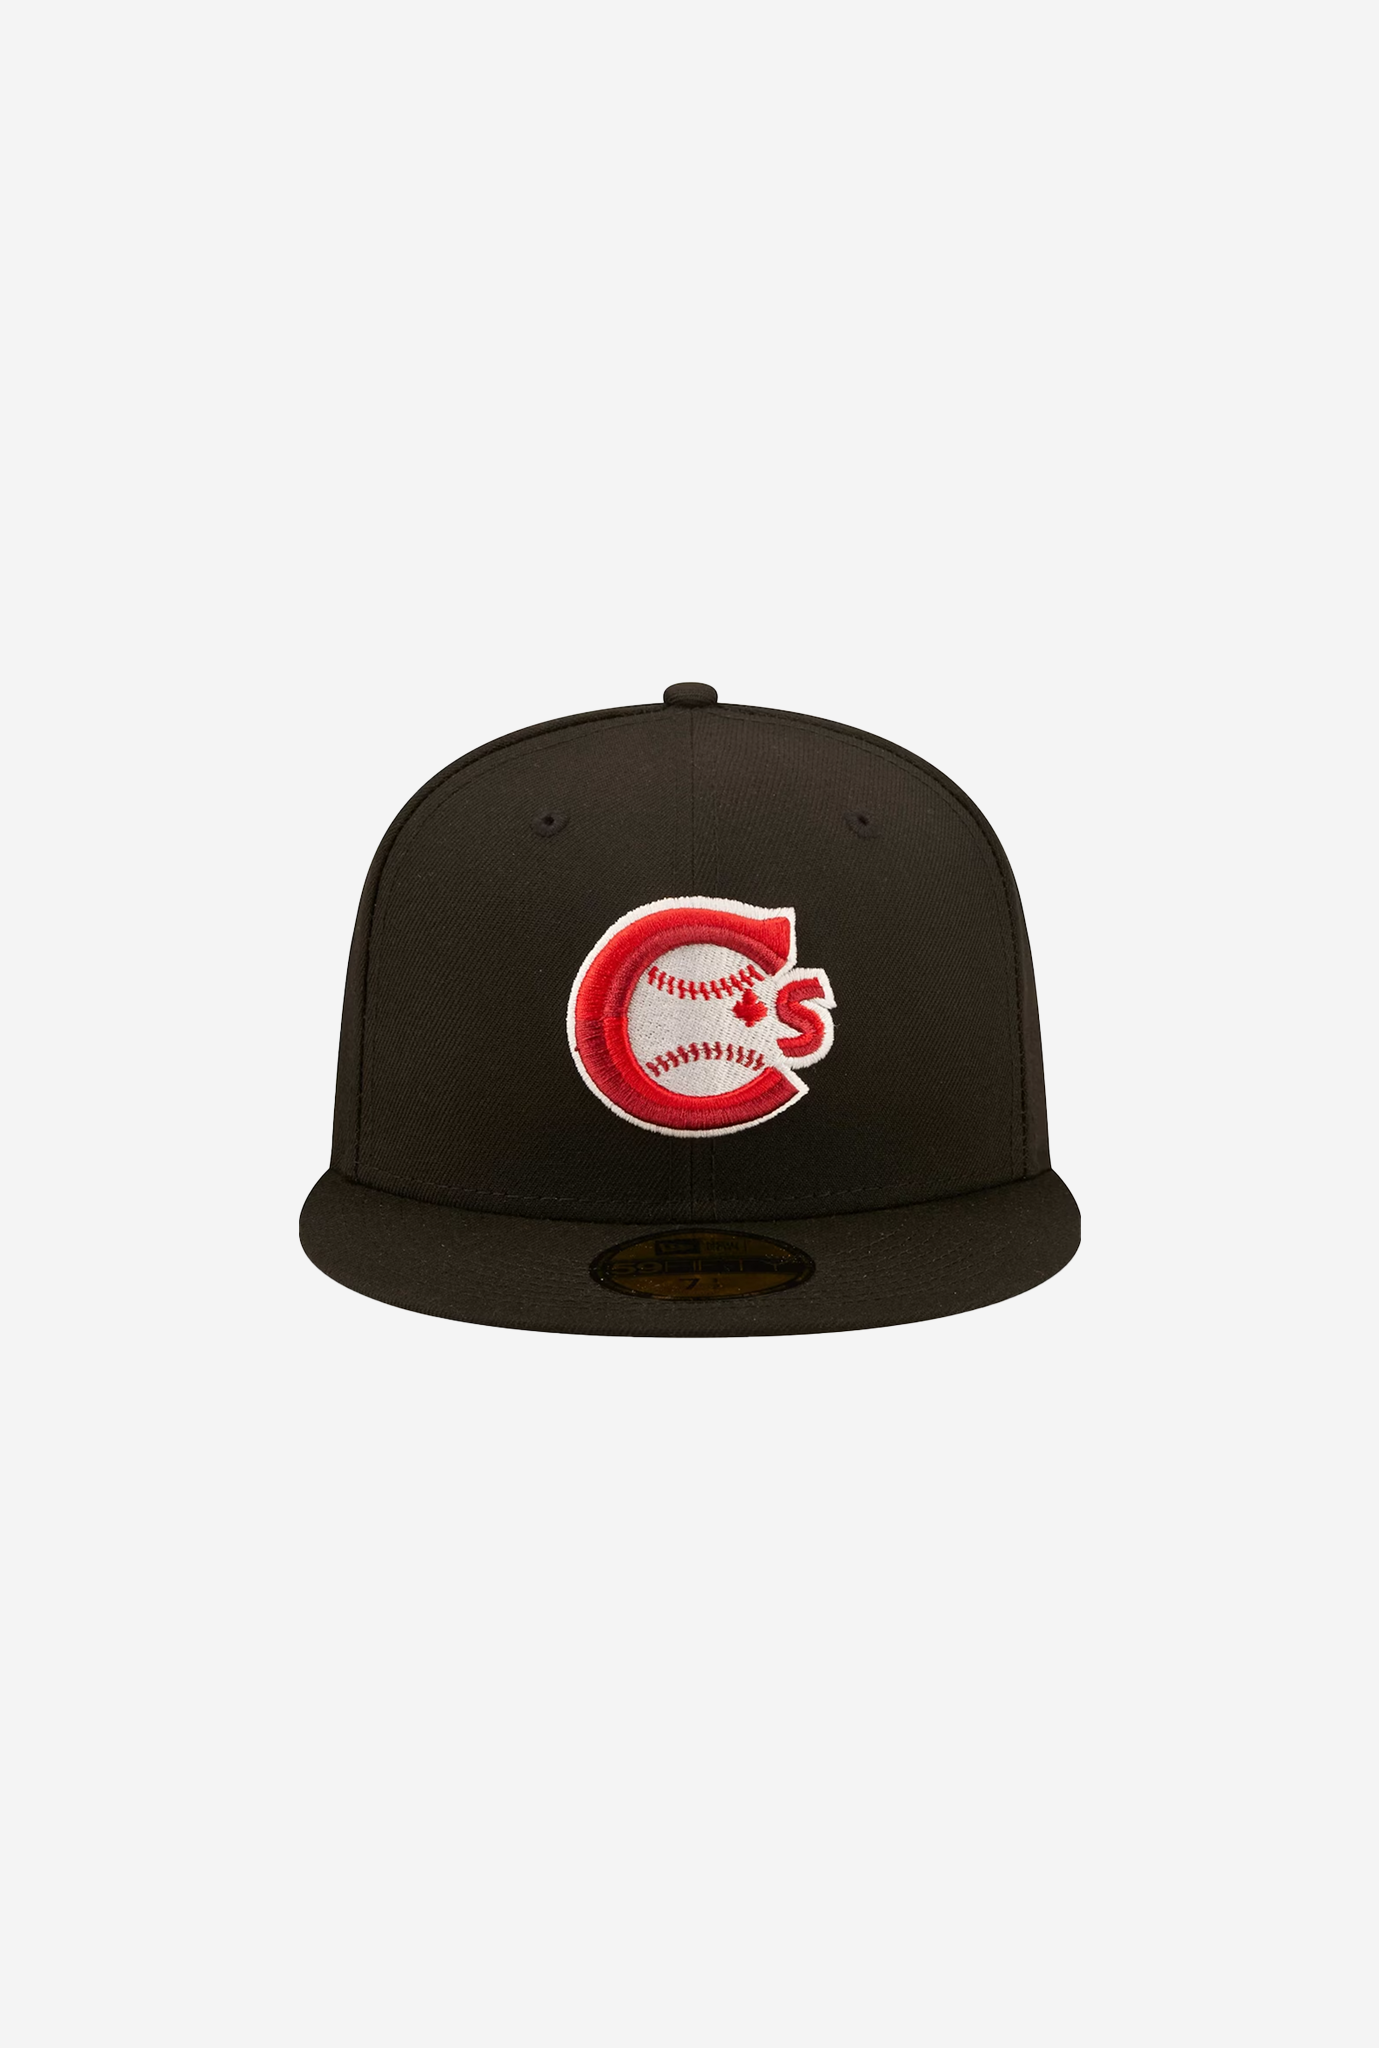 Vancouver Canadians Alternate 59FIFTY